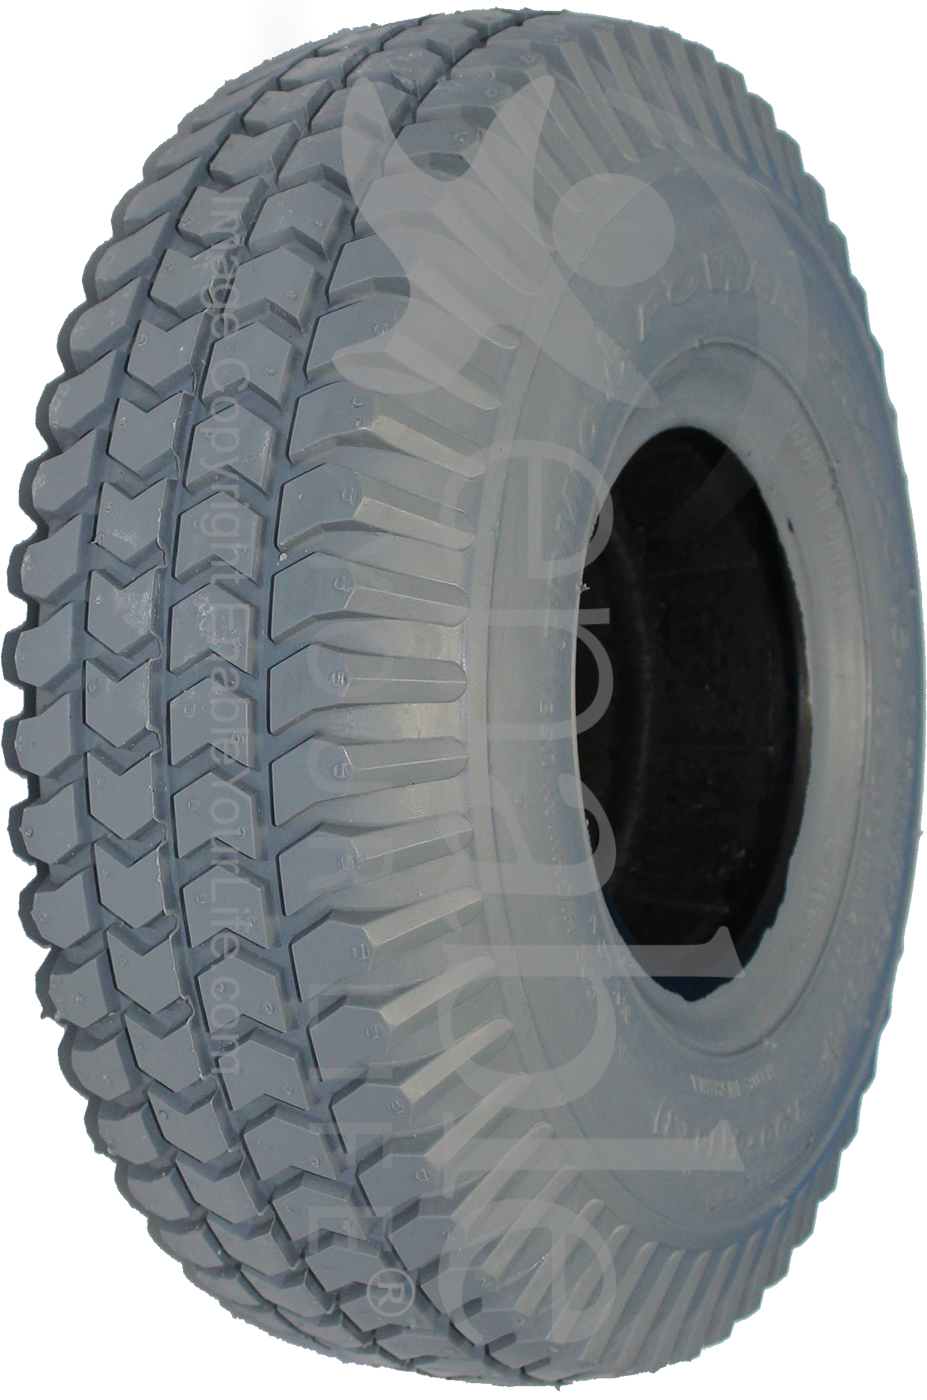 NEW TIRES SET OF 4. LARGE DINKY SUPERTOYS 20MM O/D ROUND TREAD GREY TIRES 